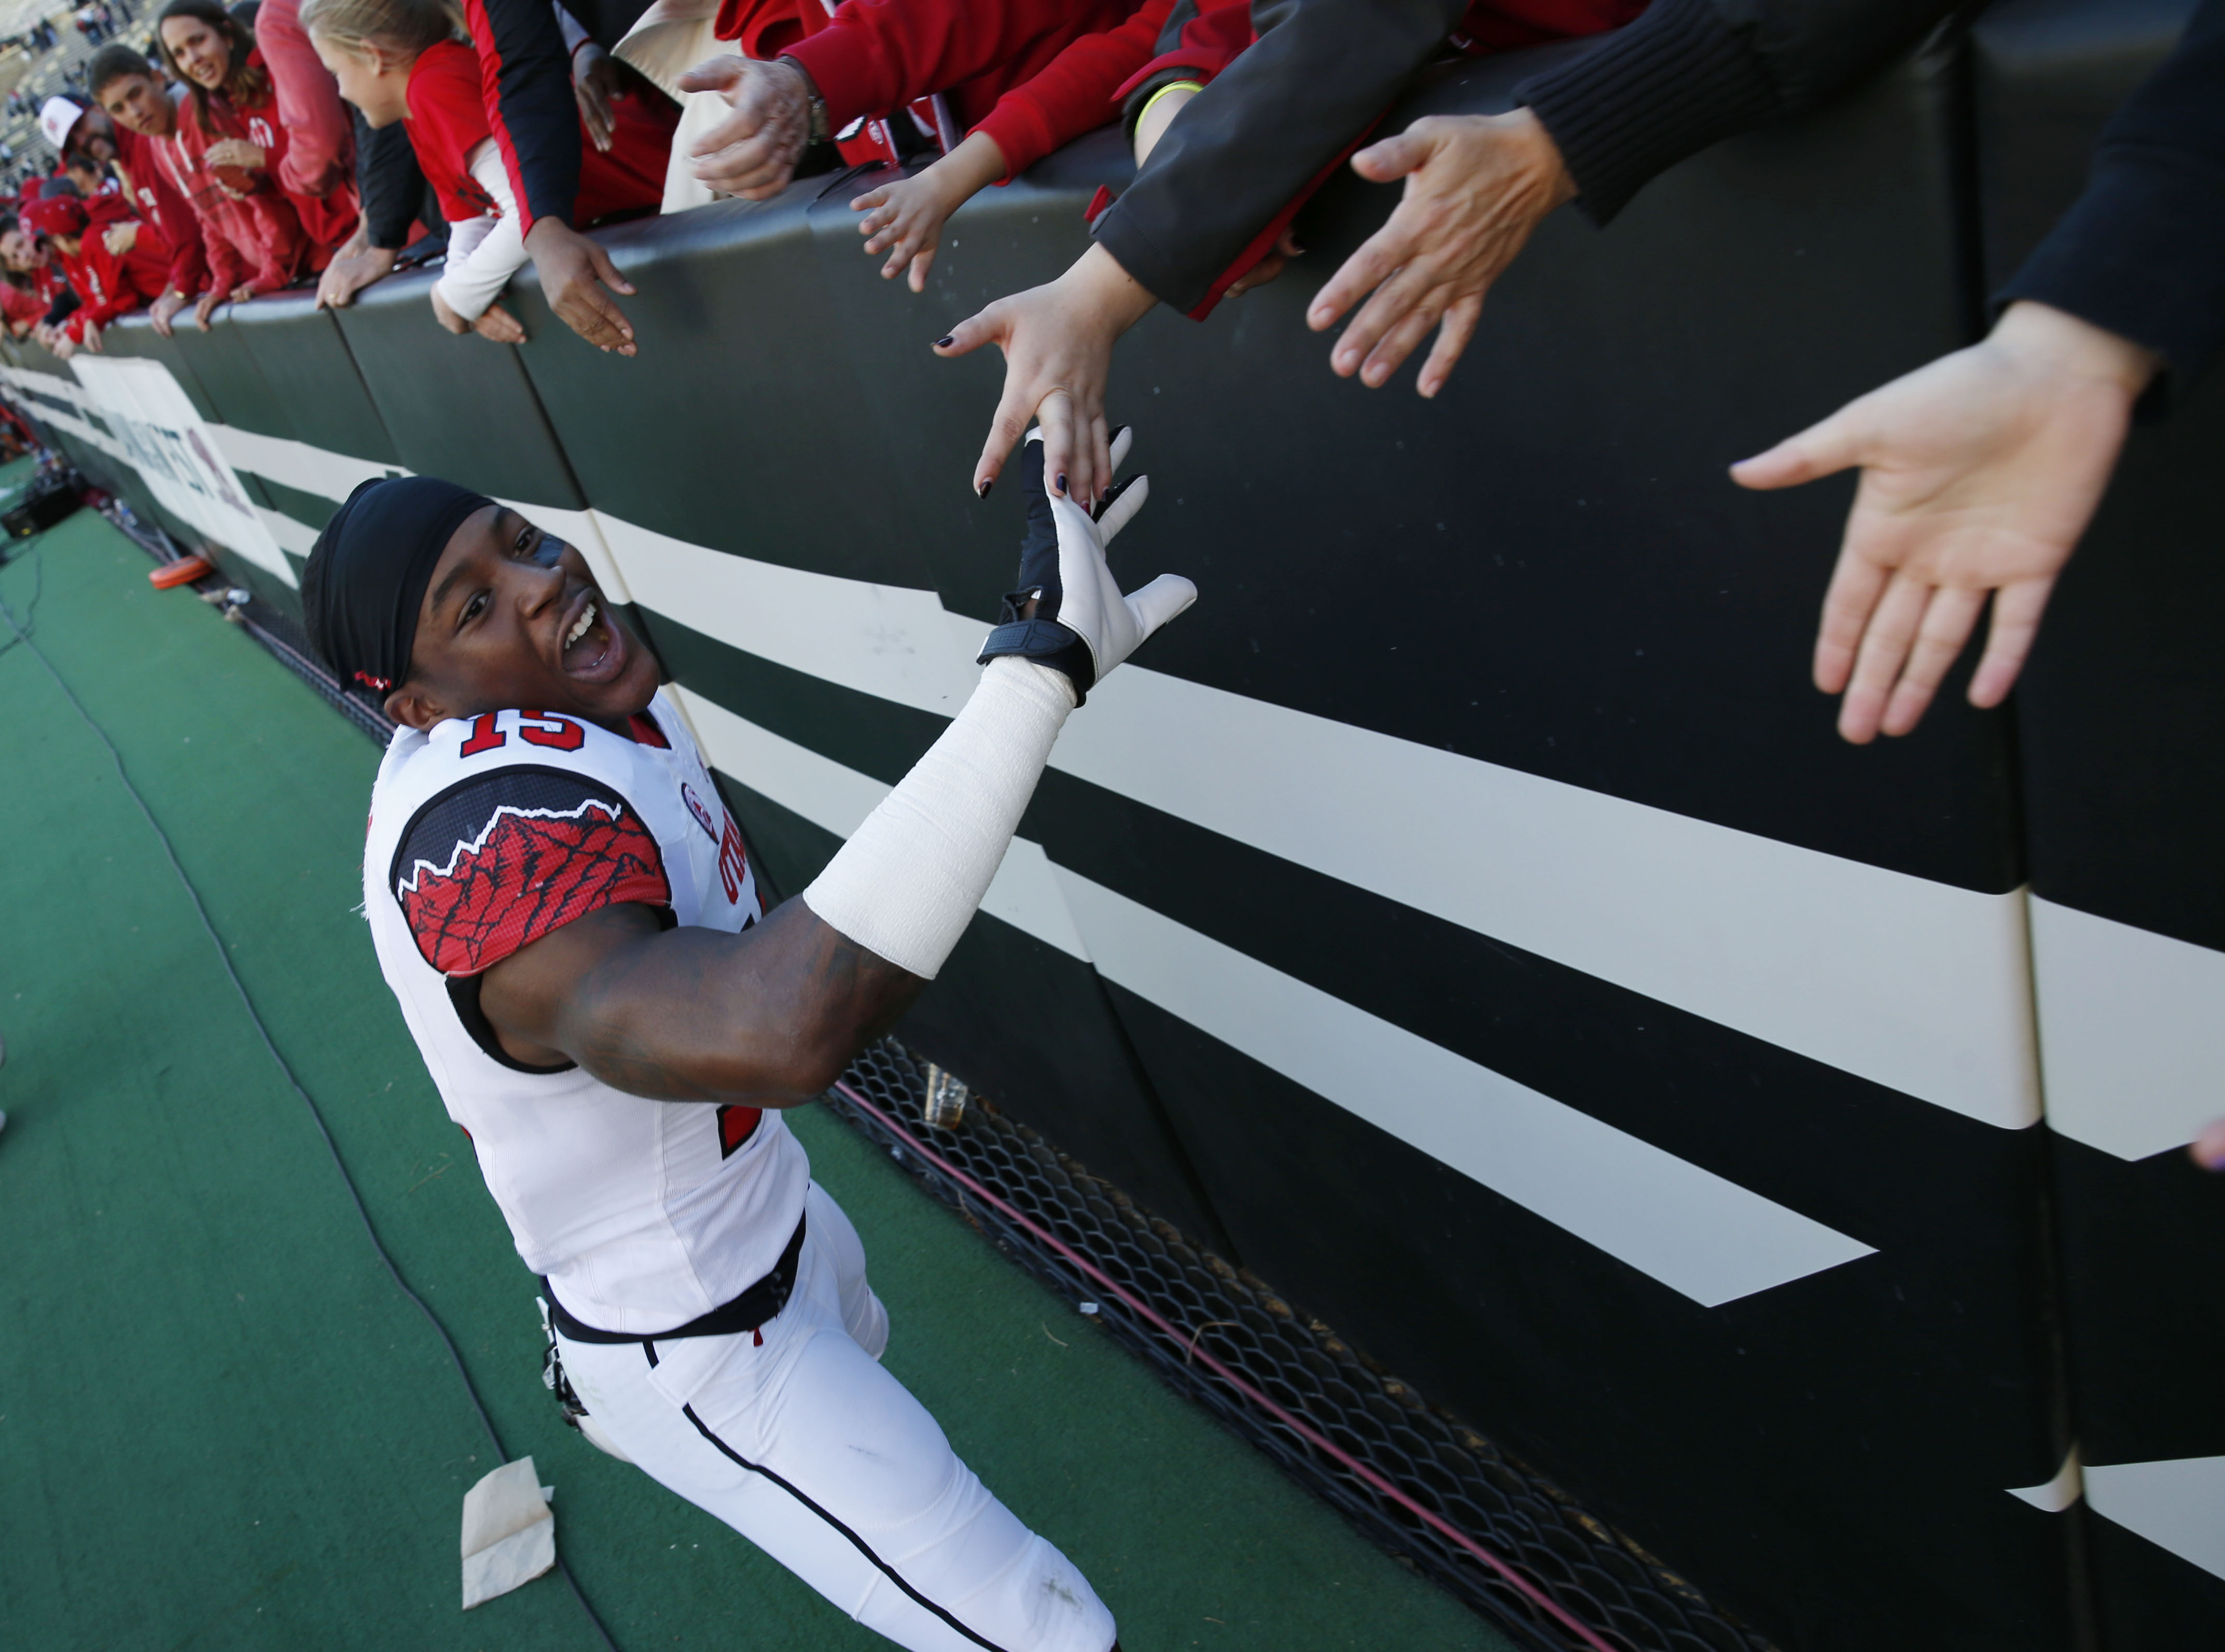 Utah defensive back Dominique Hatfield is congratulated by fans as he leaves the field Utah's 38-34 victory over Colorado in an NCAA college football game in Boulder, Colo., Saturday, Nov. 29, 2014. Hatfield intercepted a pass and scored the winning touchdown in the fourth quarter to secure the win for Utah. (AP Photo/David Zalubowski)